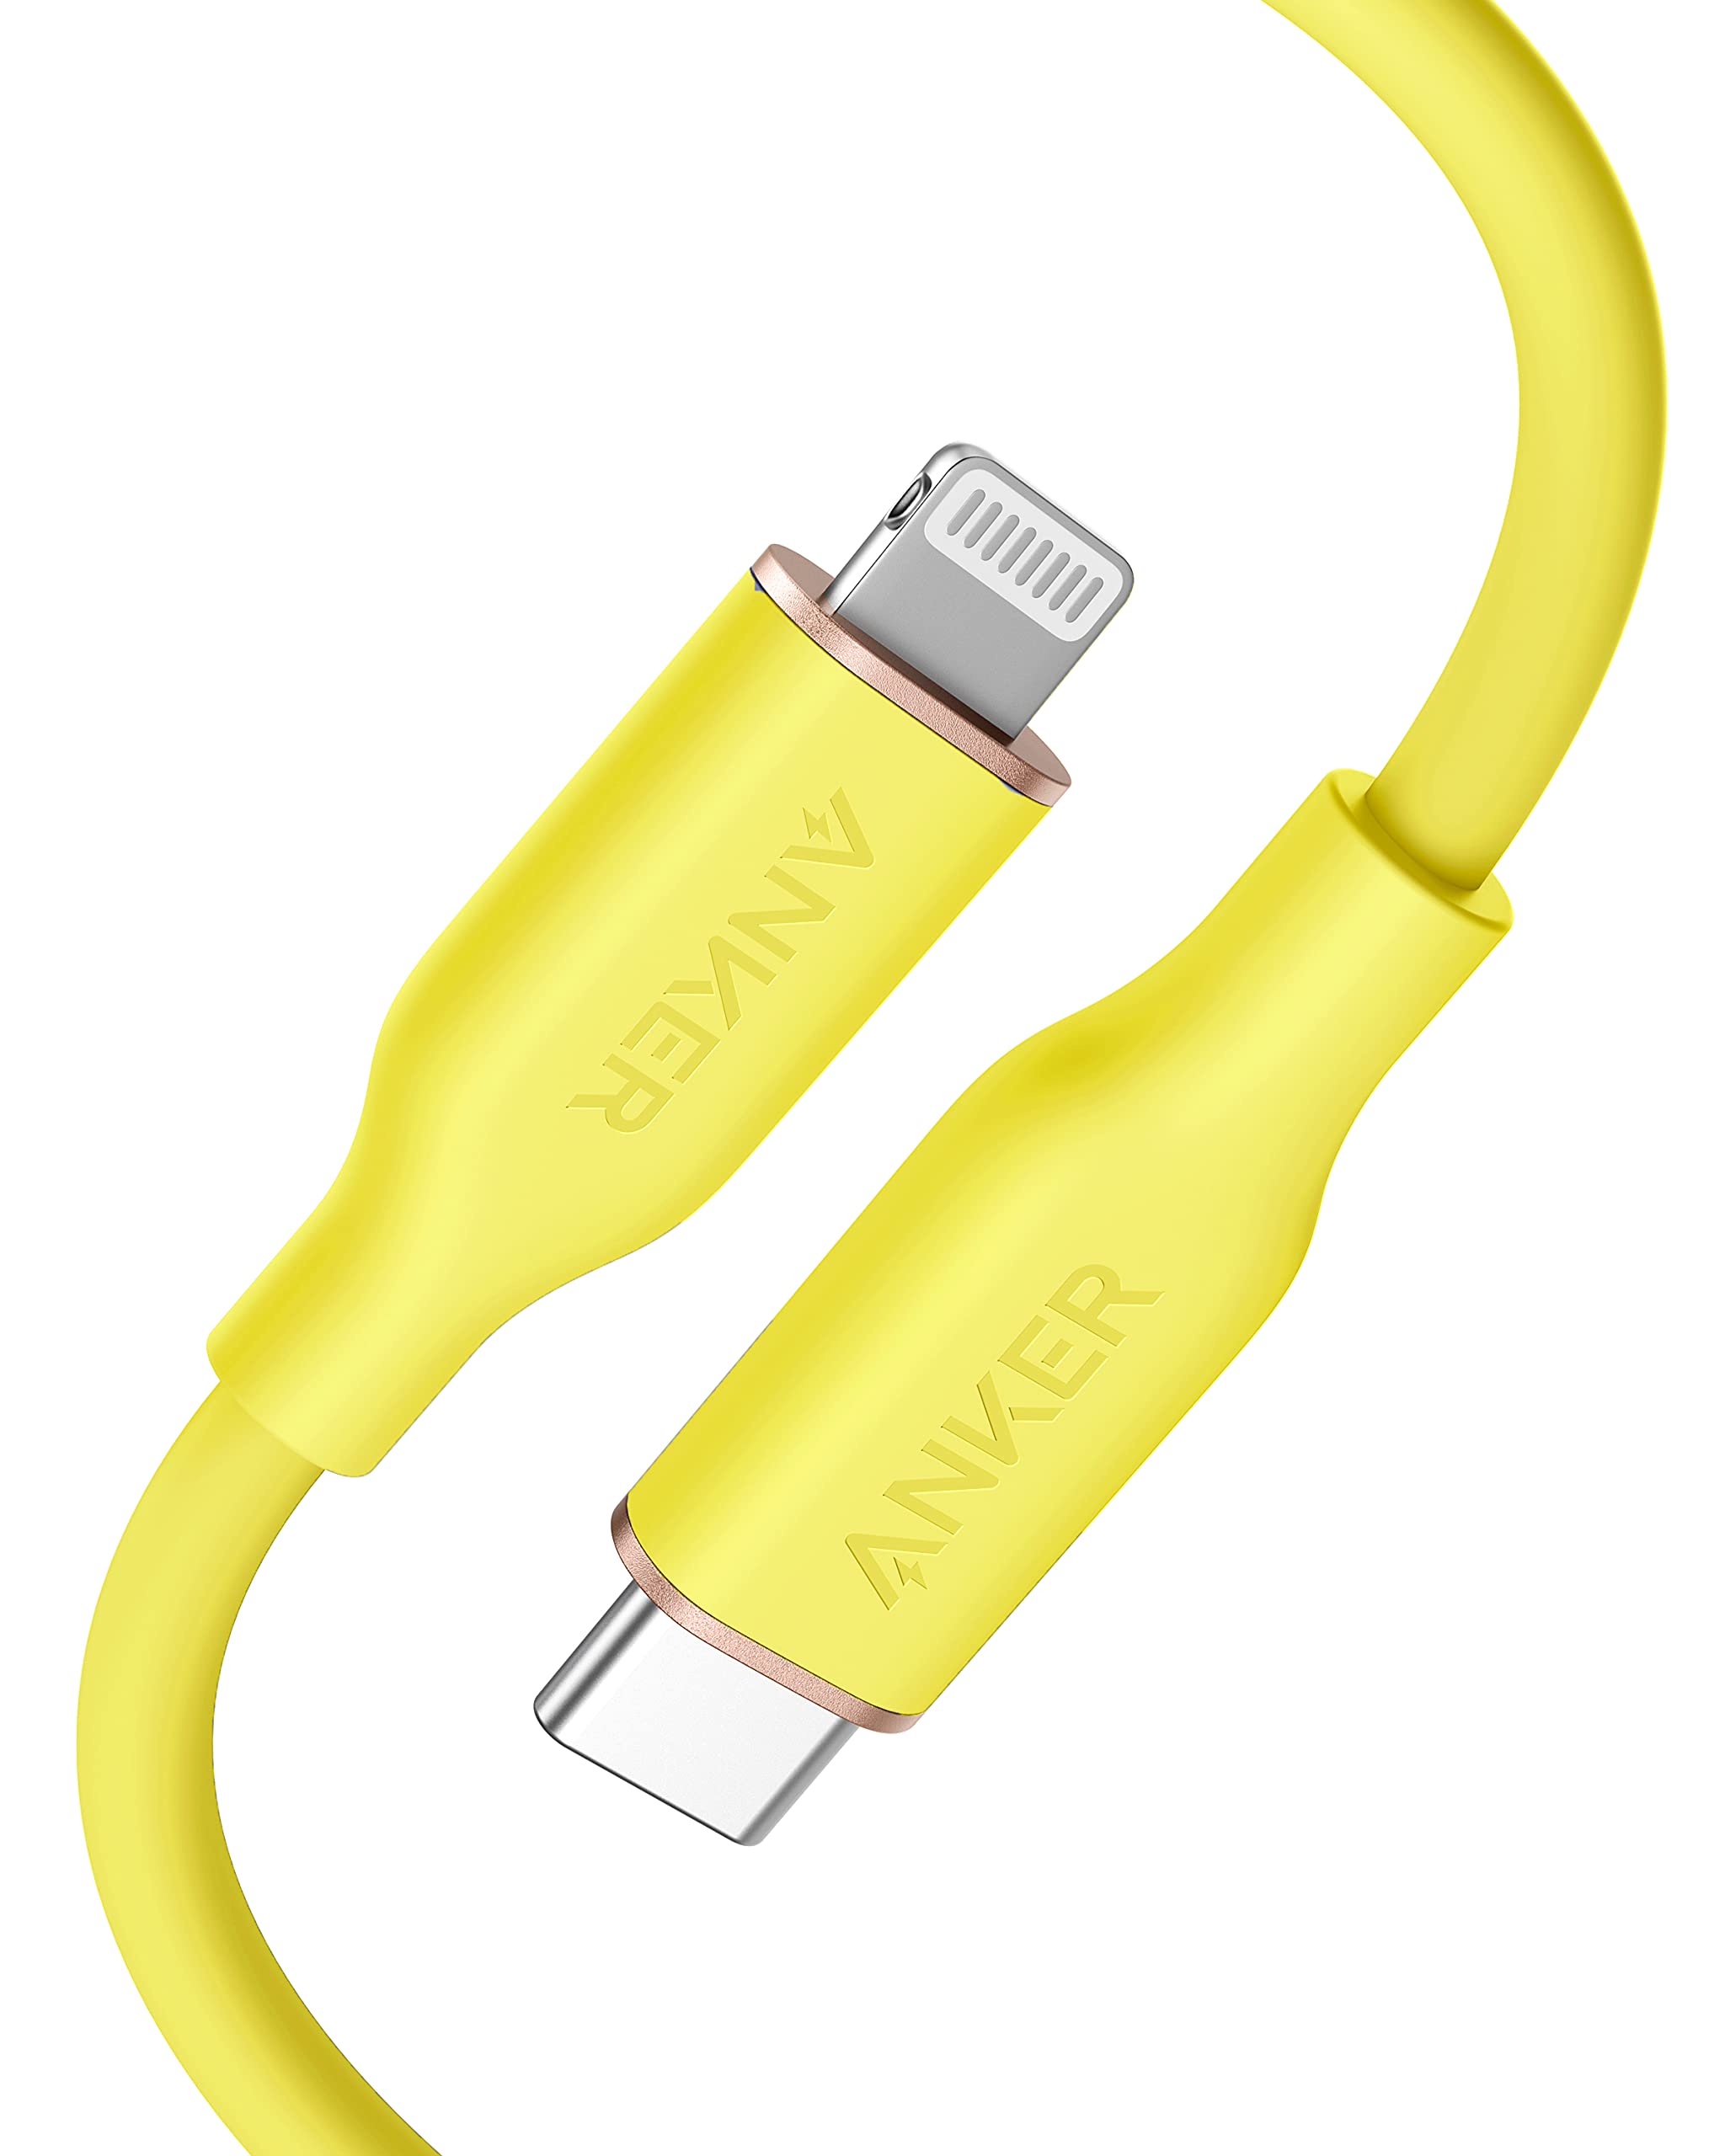 Anker 641 USB-C to Lightning Cable(Flow, Silicone) - Anker Canada